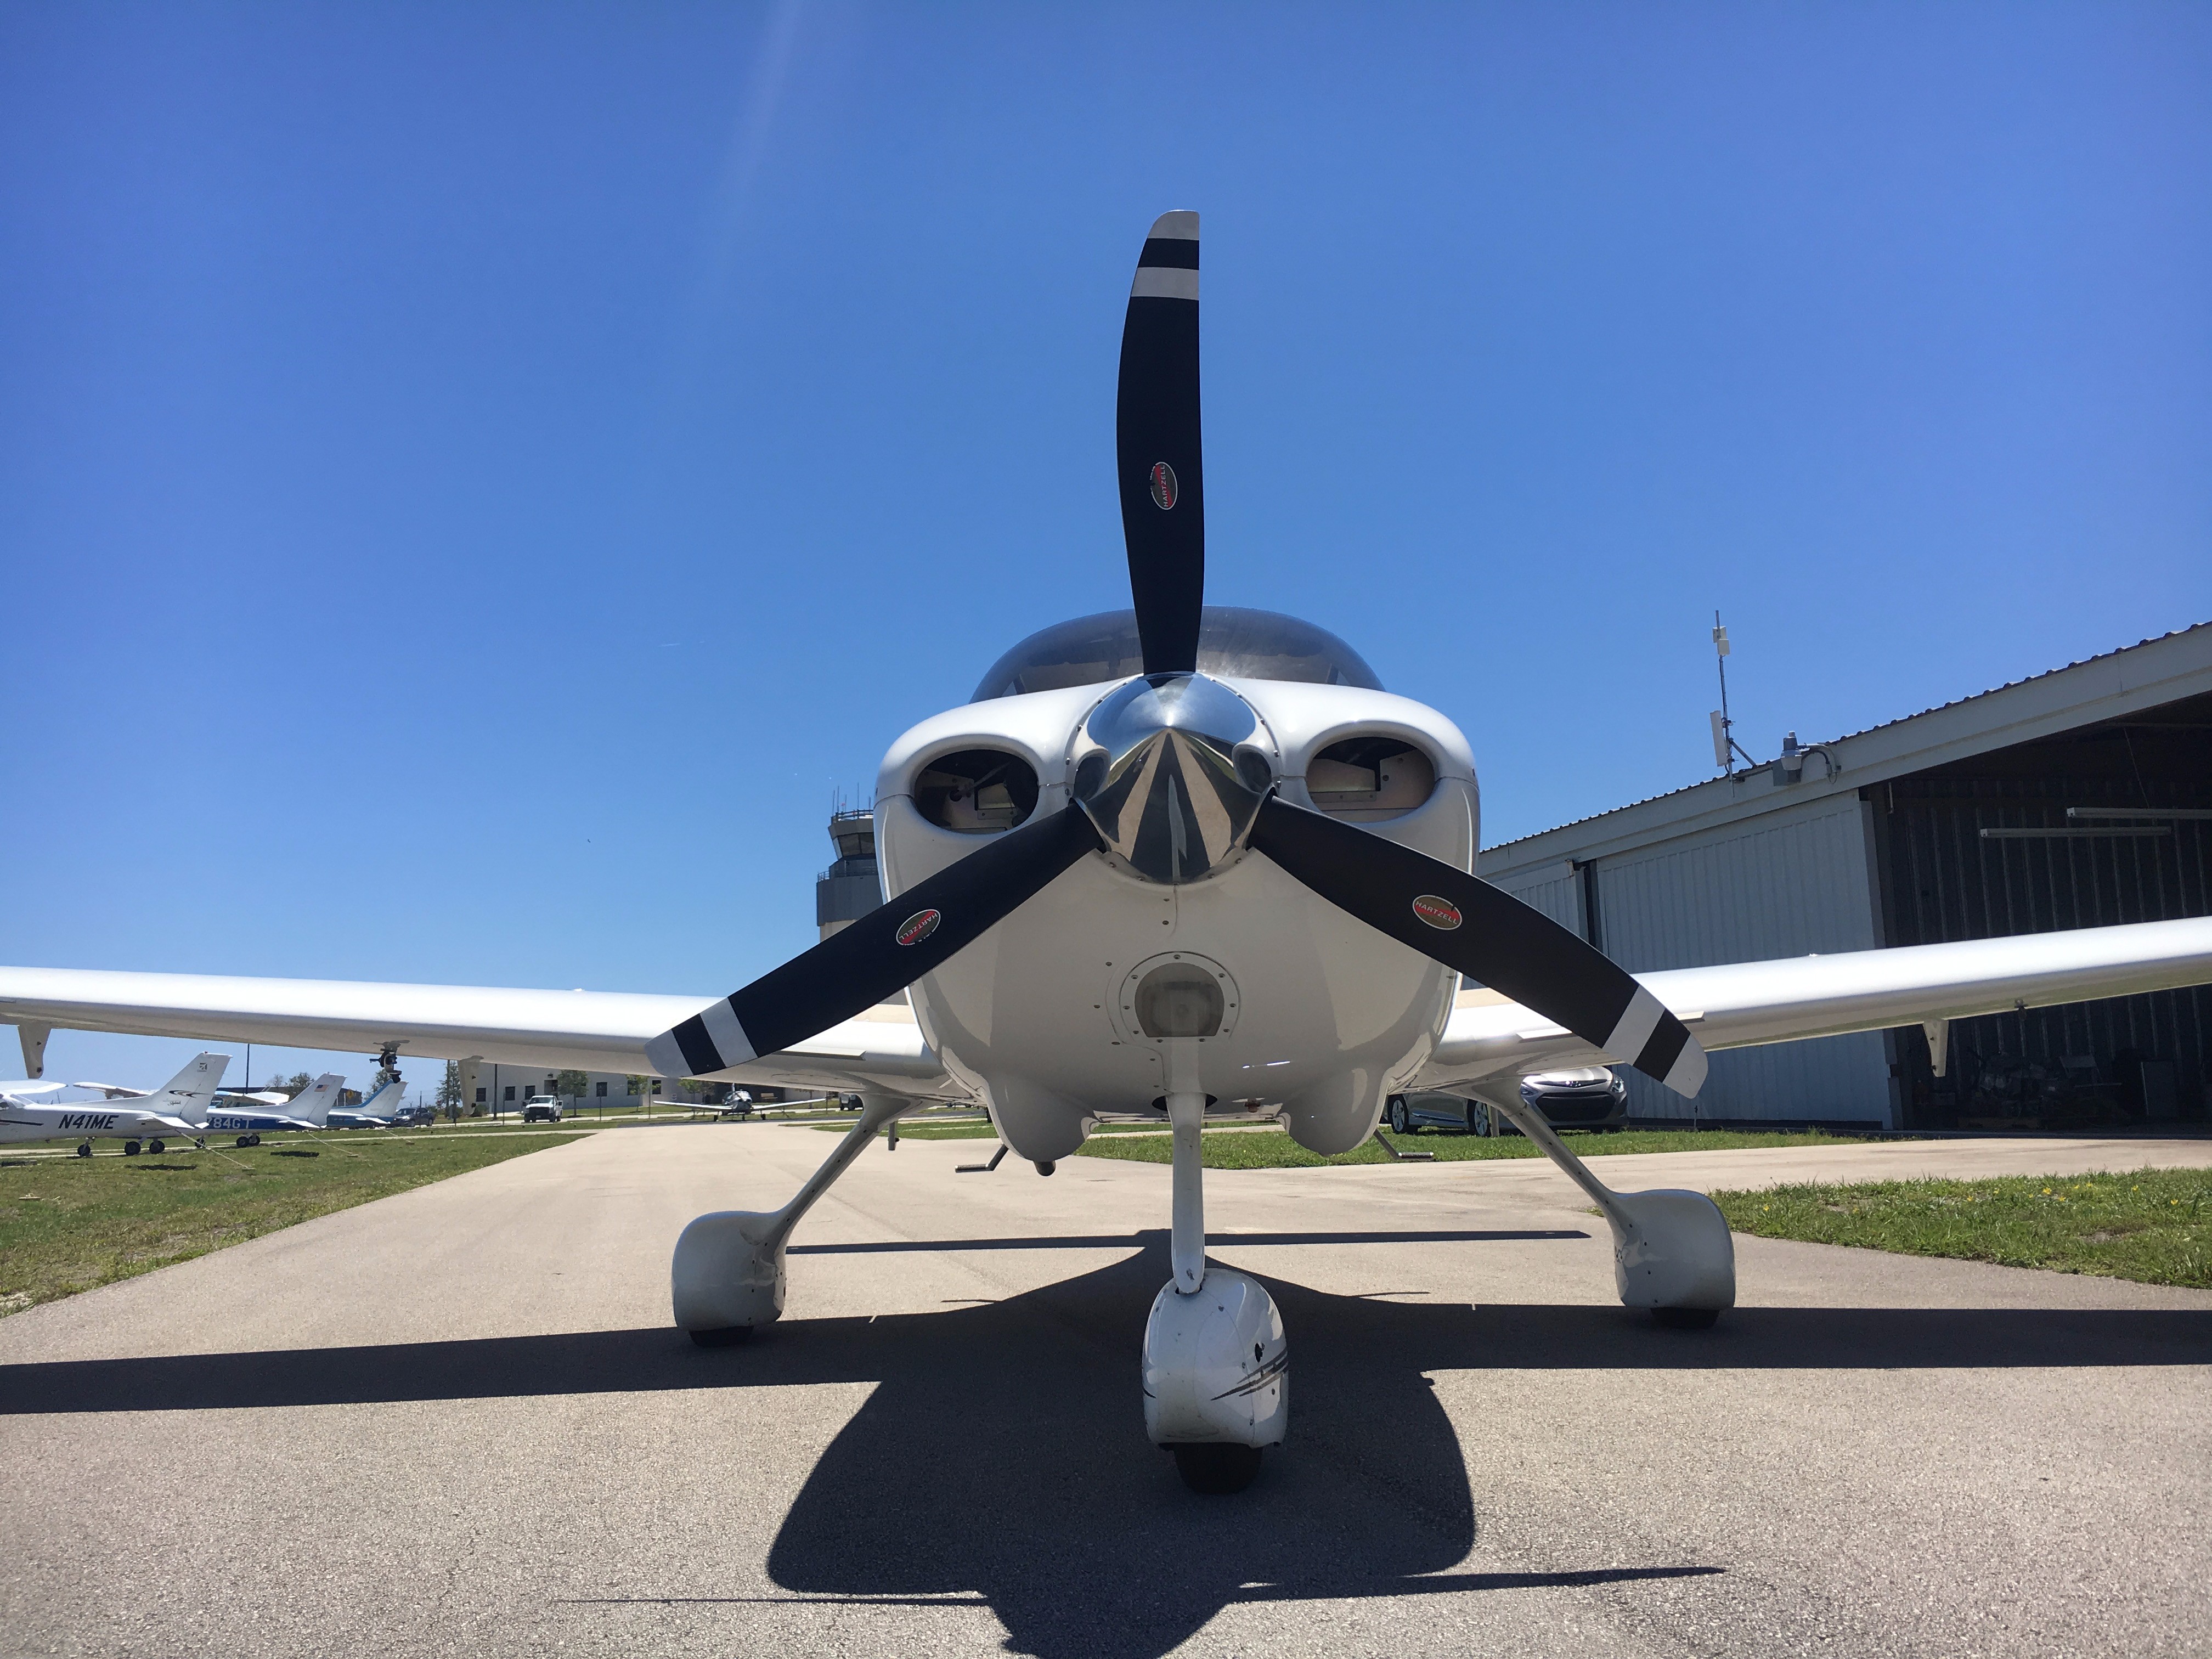 Airplanes for rent in Florida - SkyEagle Aviation Academy